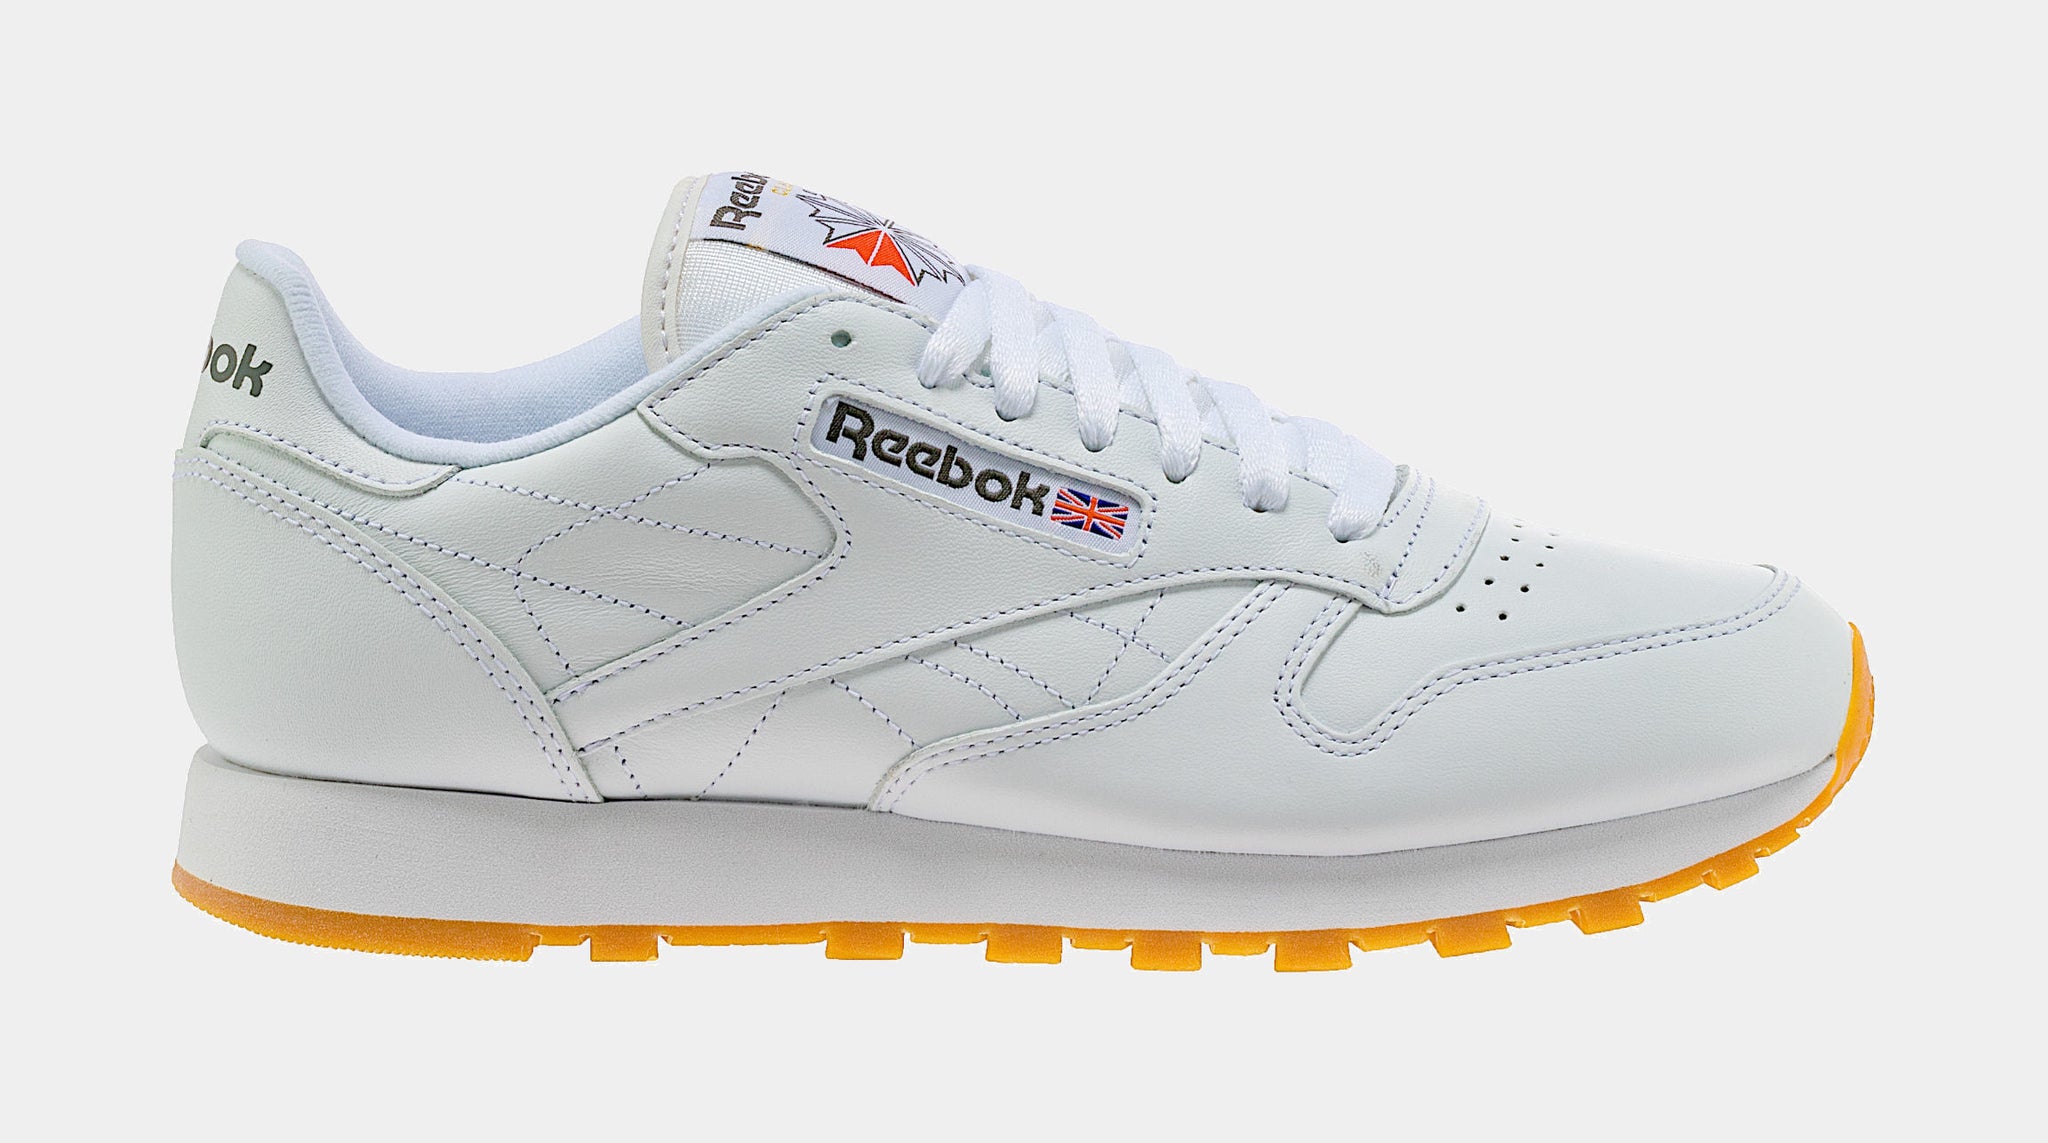 Reebok Classic Leather sneakers in white with gum sole, ASOS